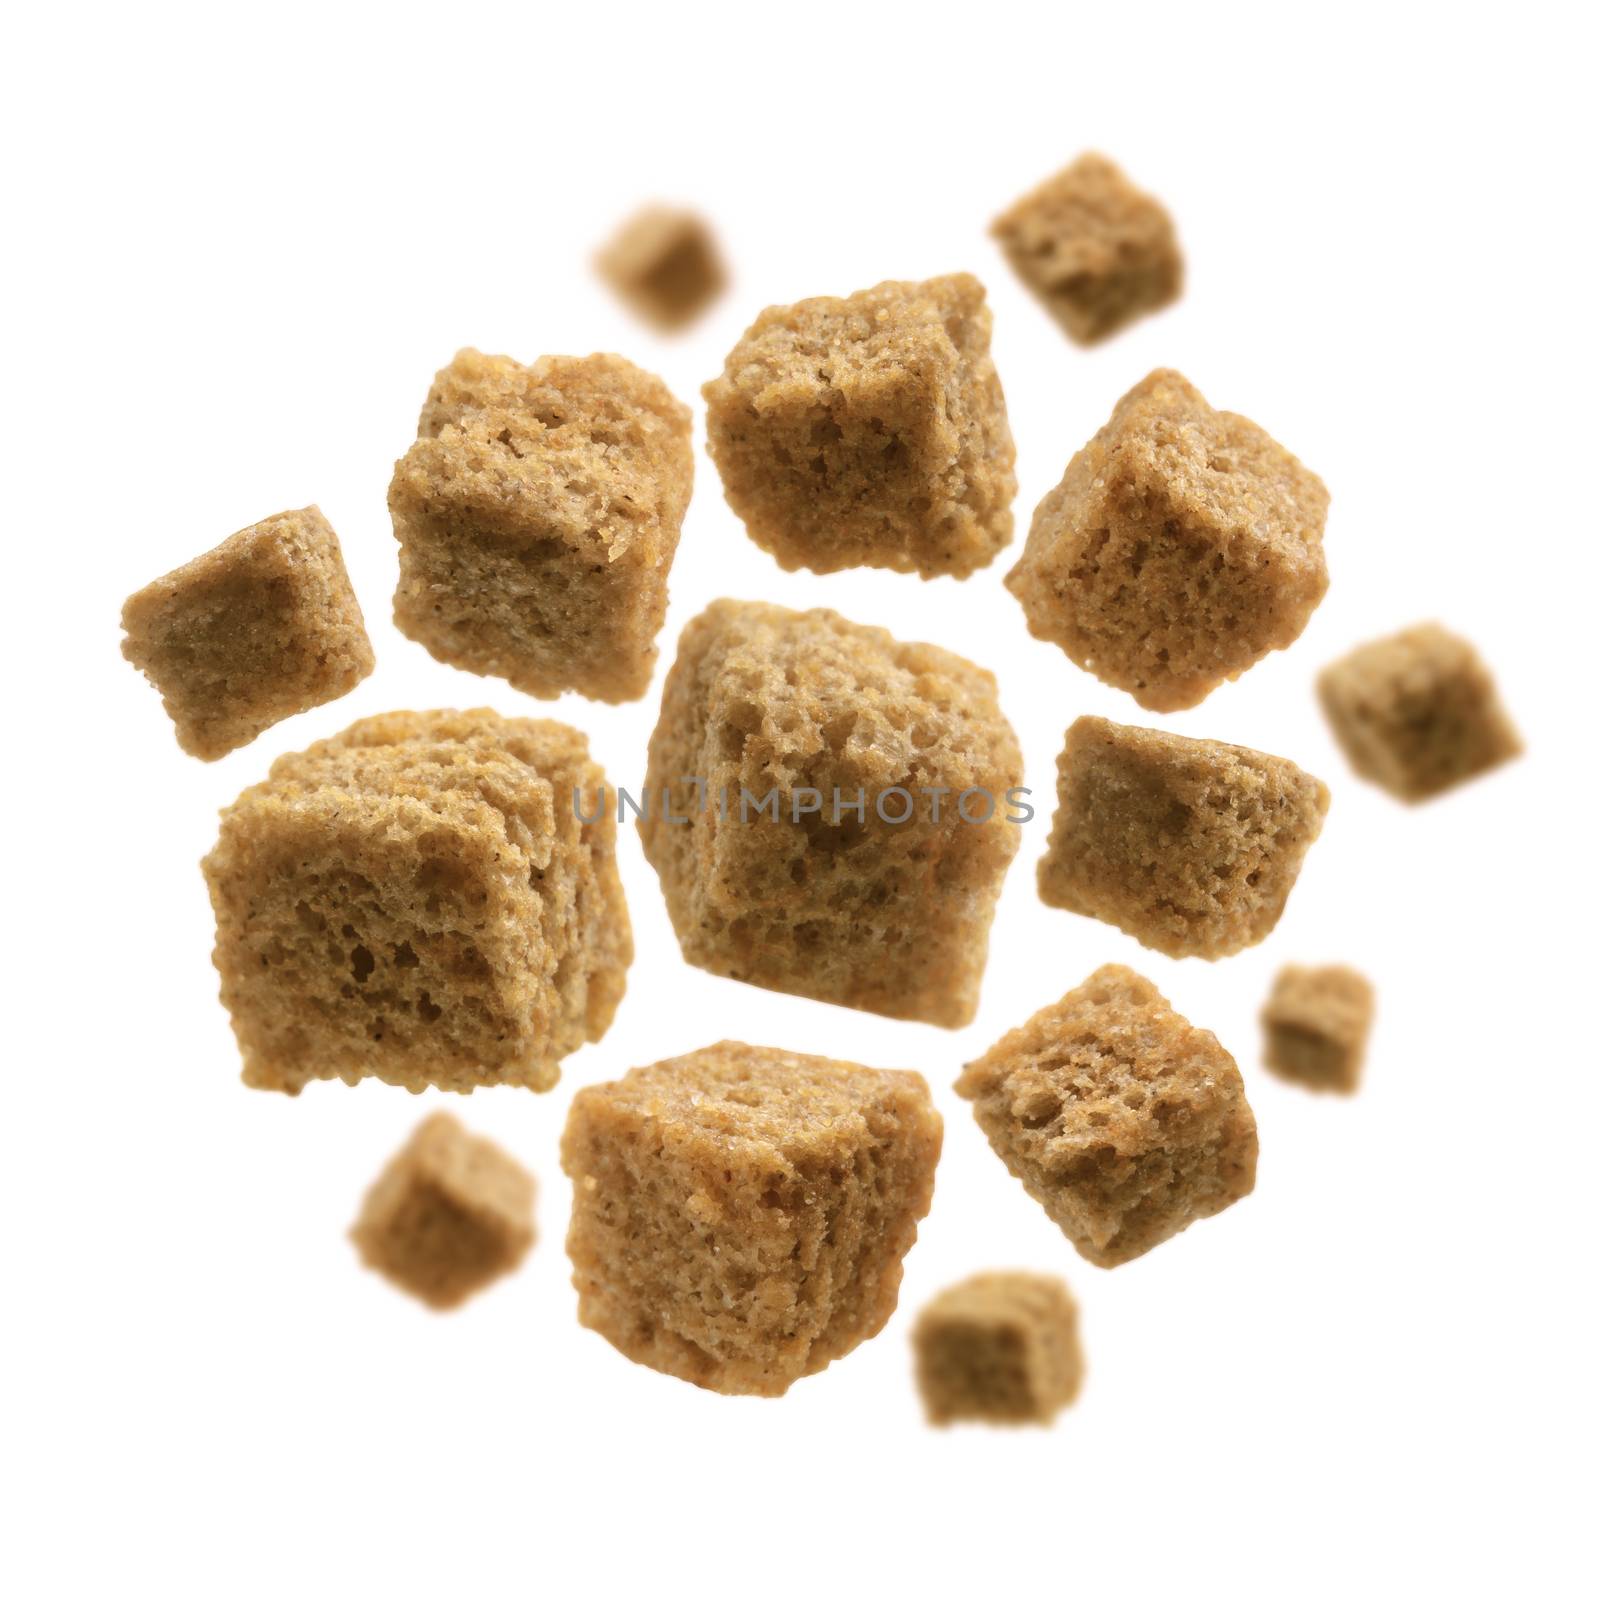 Bread croutons levitate on a white background.